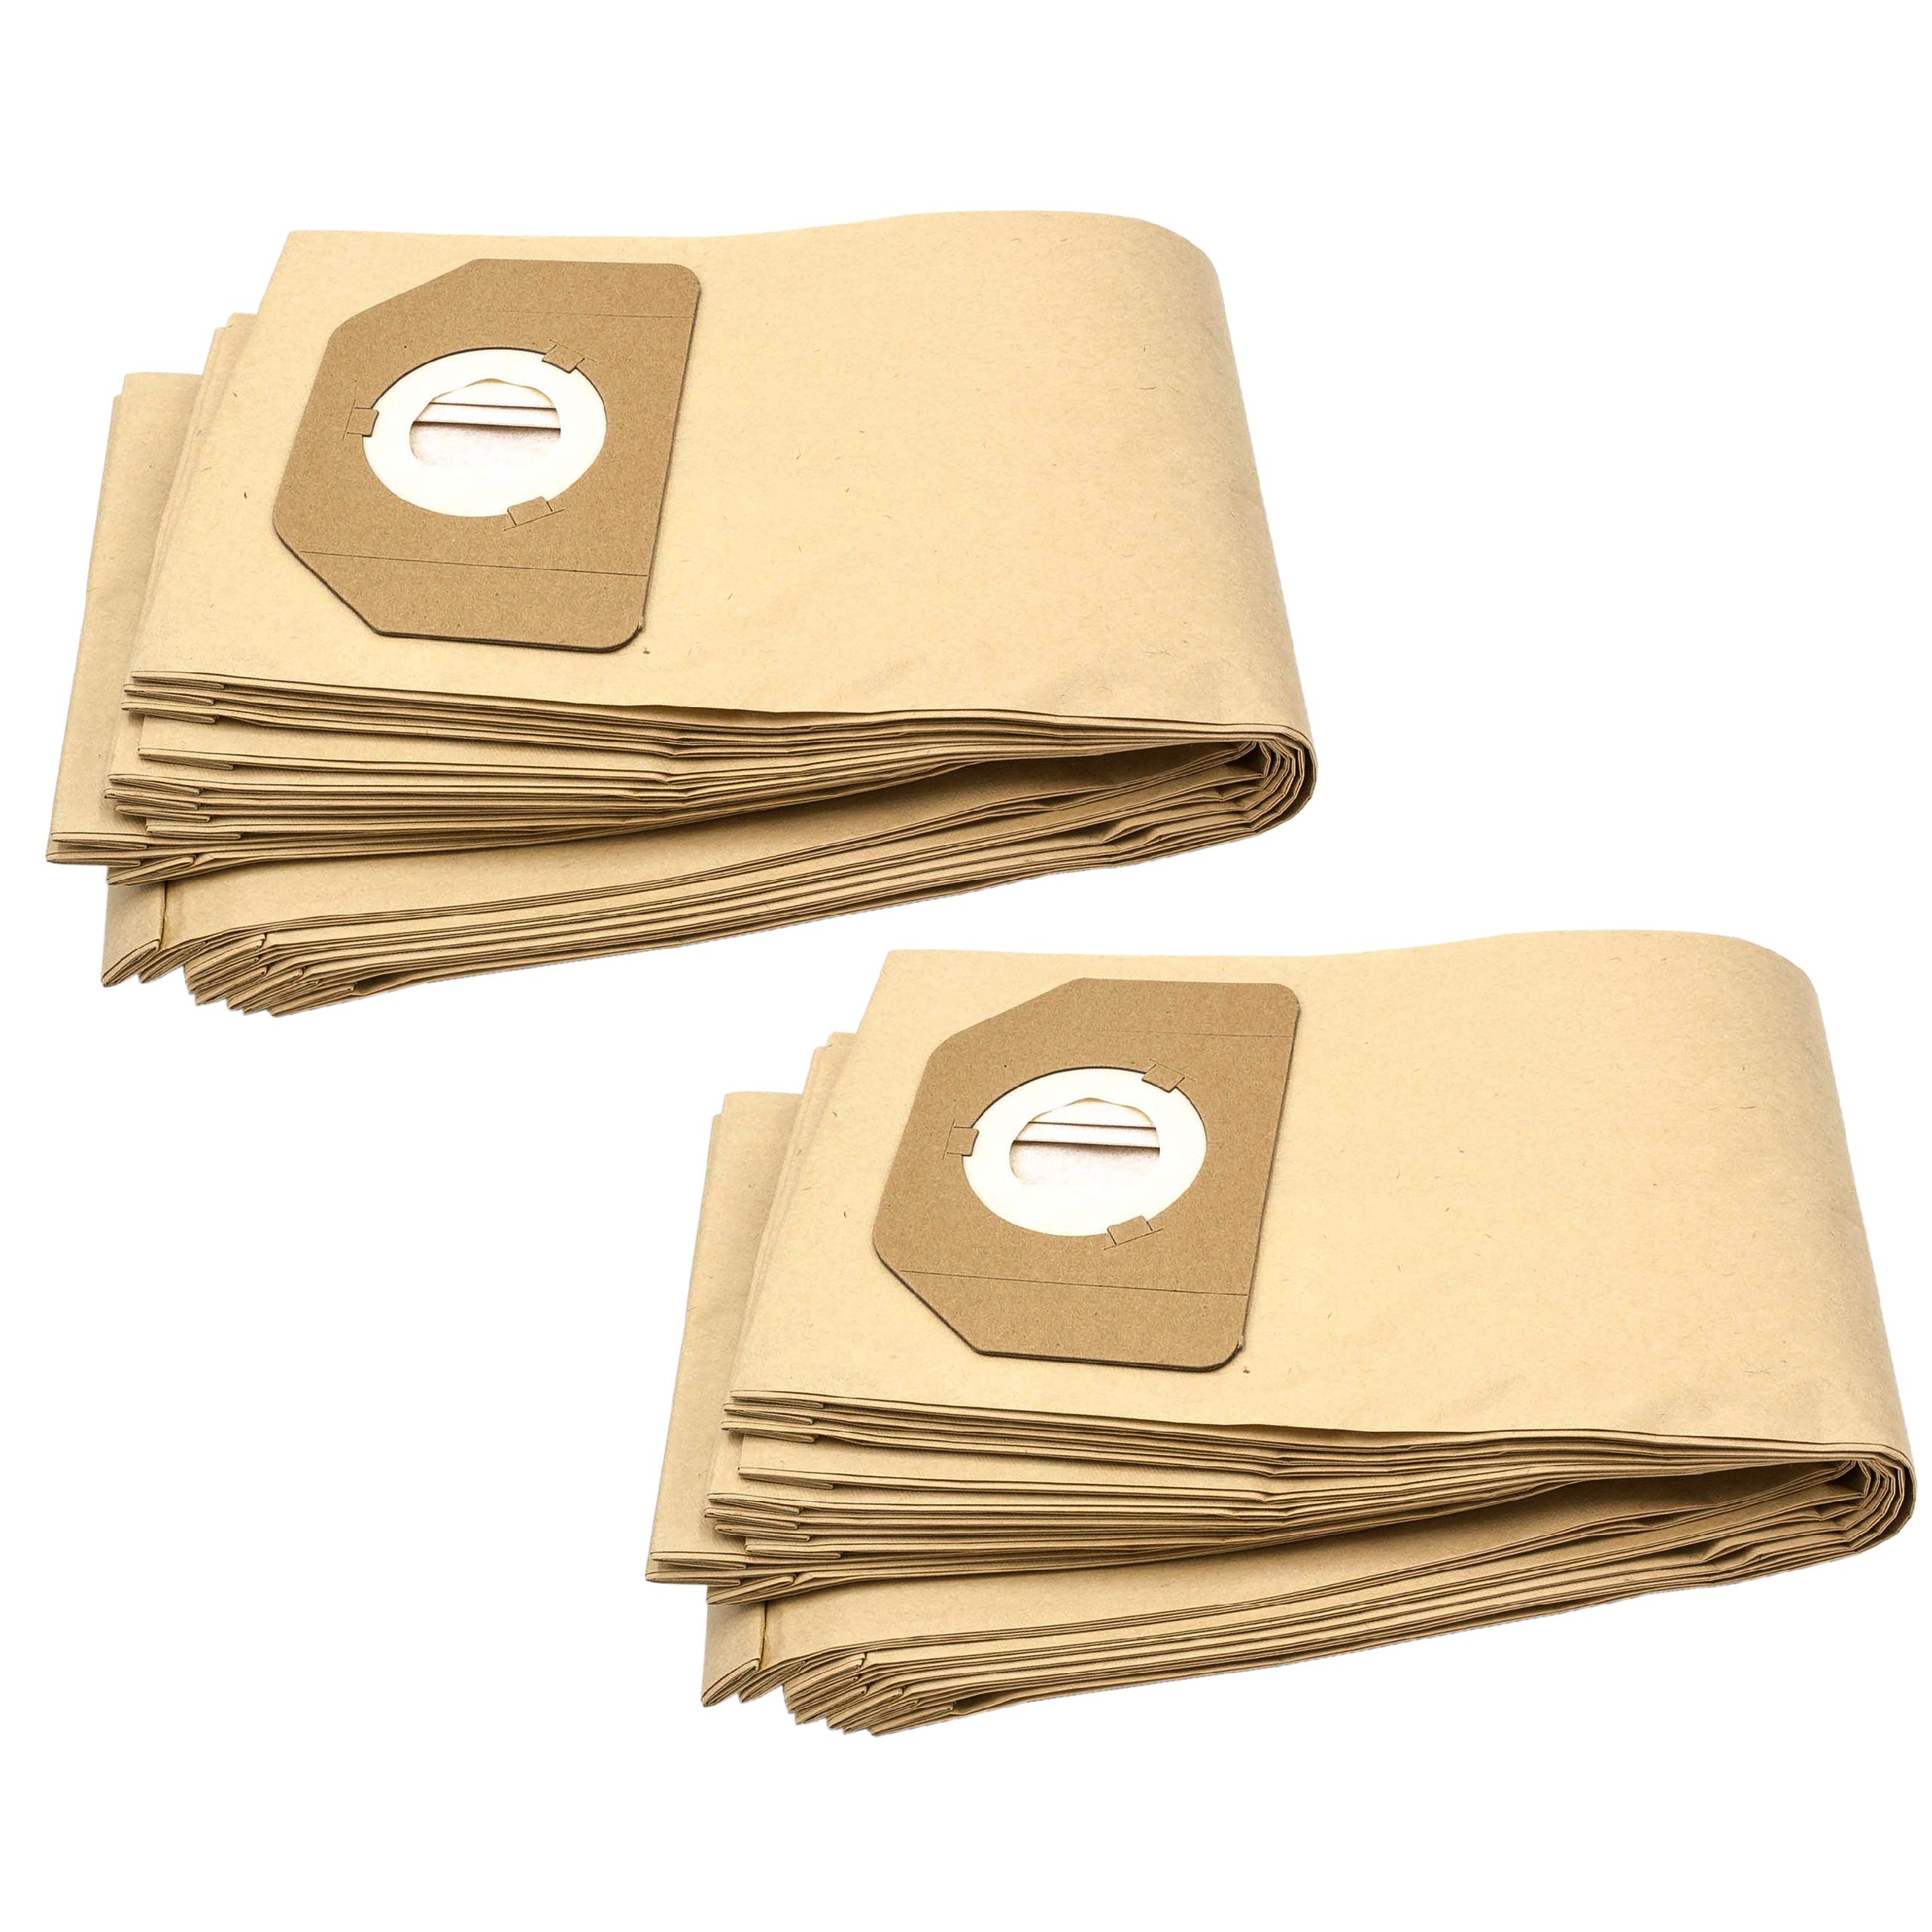 20x Vacuum Cleaner Bag replaces Kärcher 6.904-263.0 for Wilfa - paper